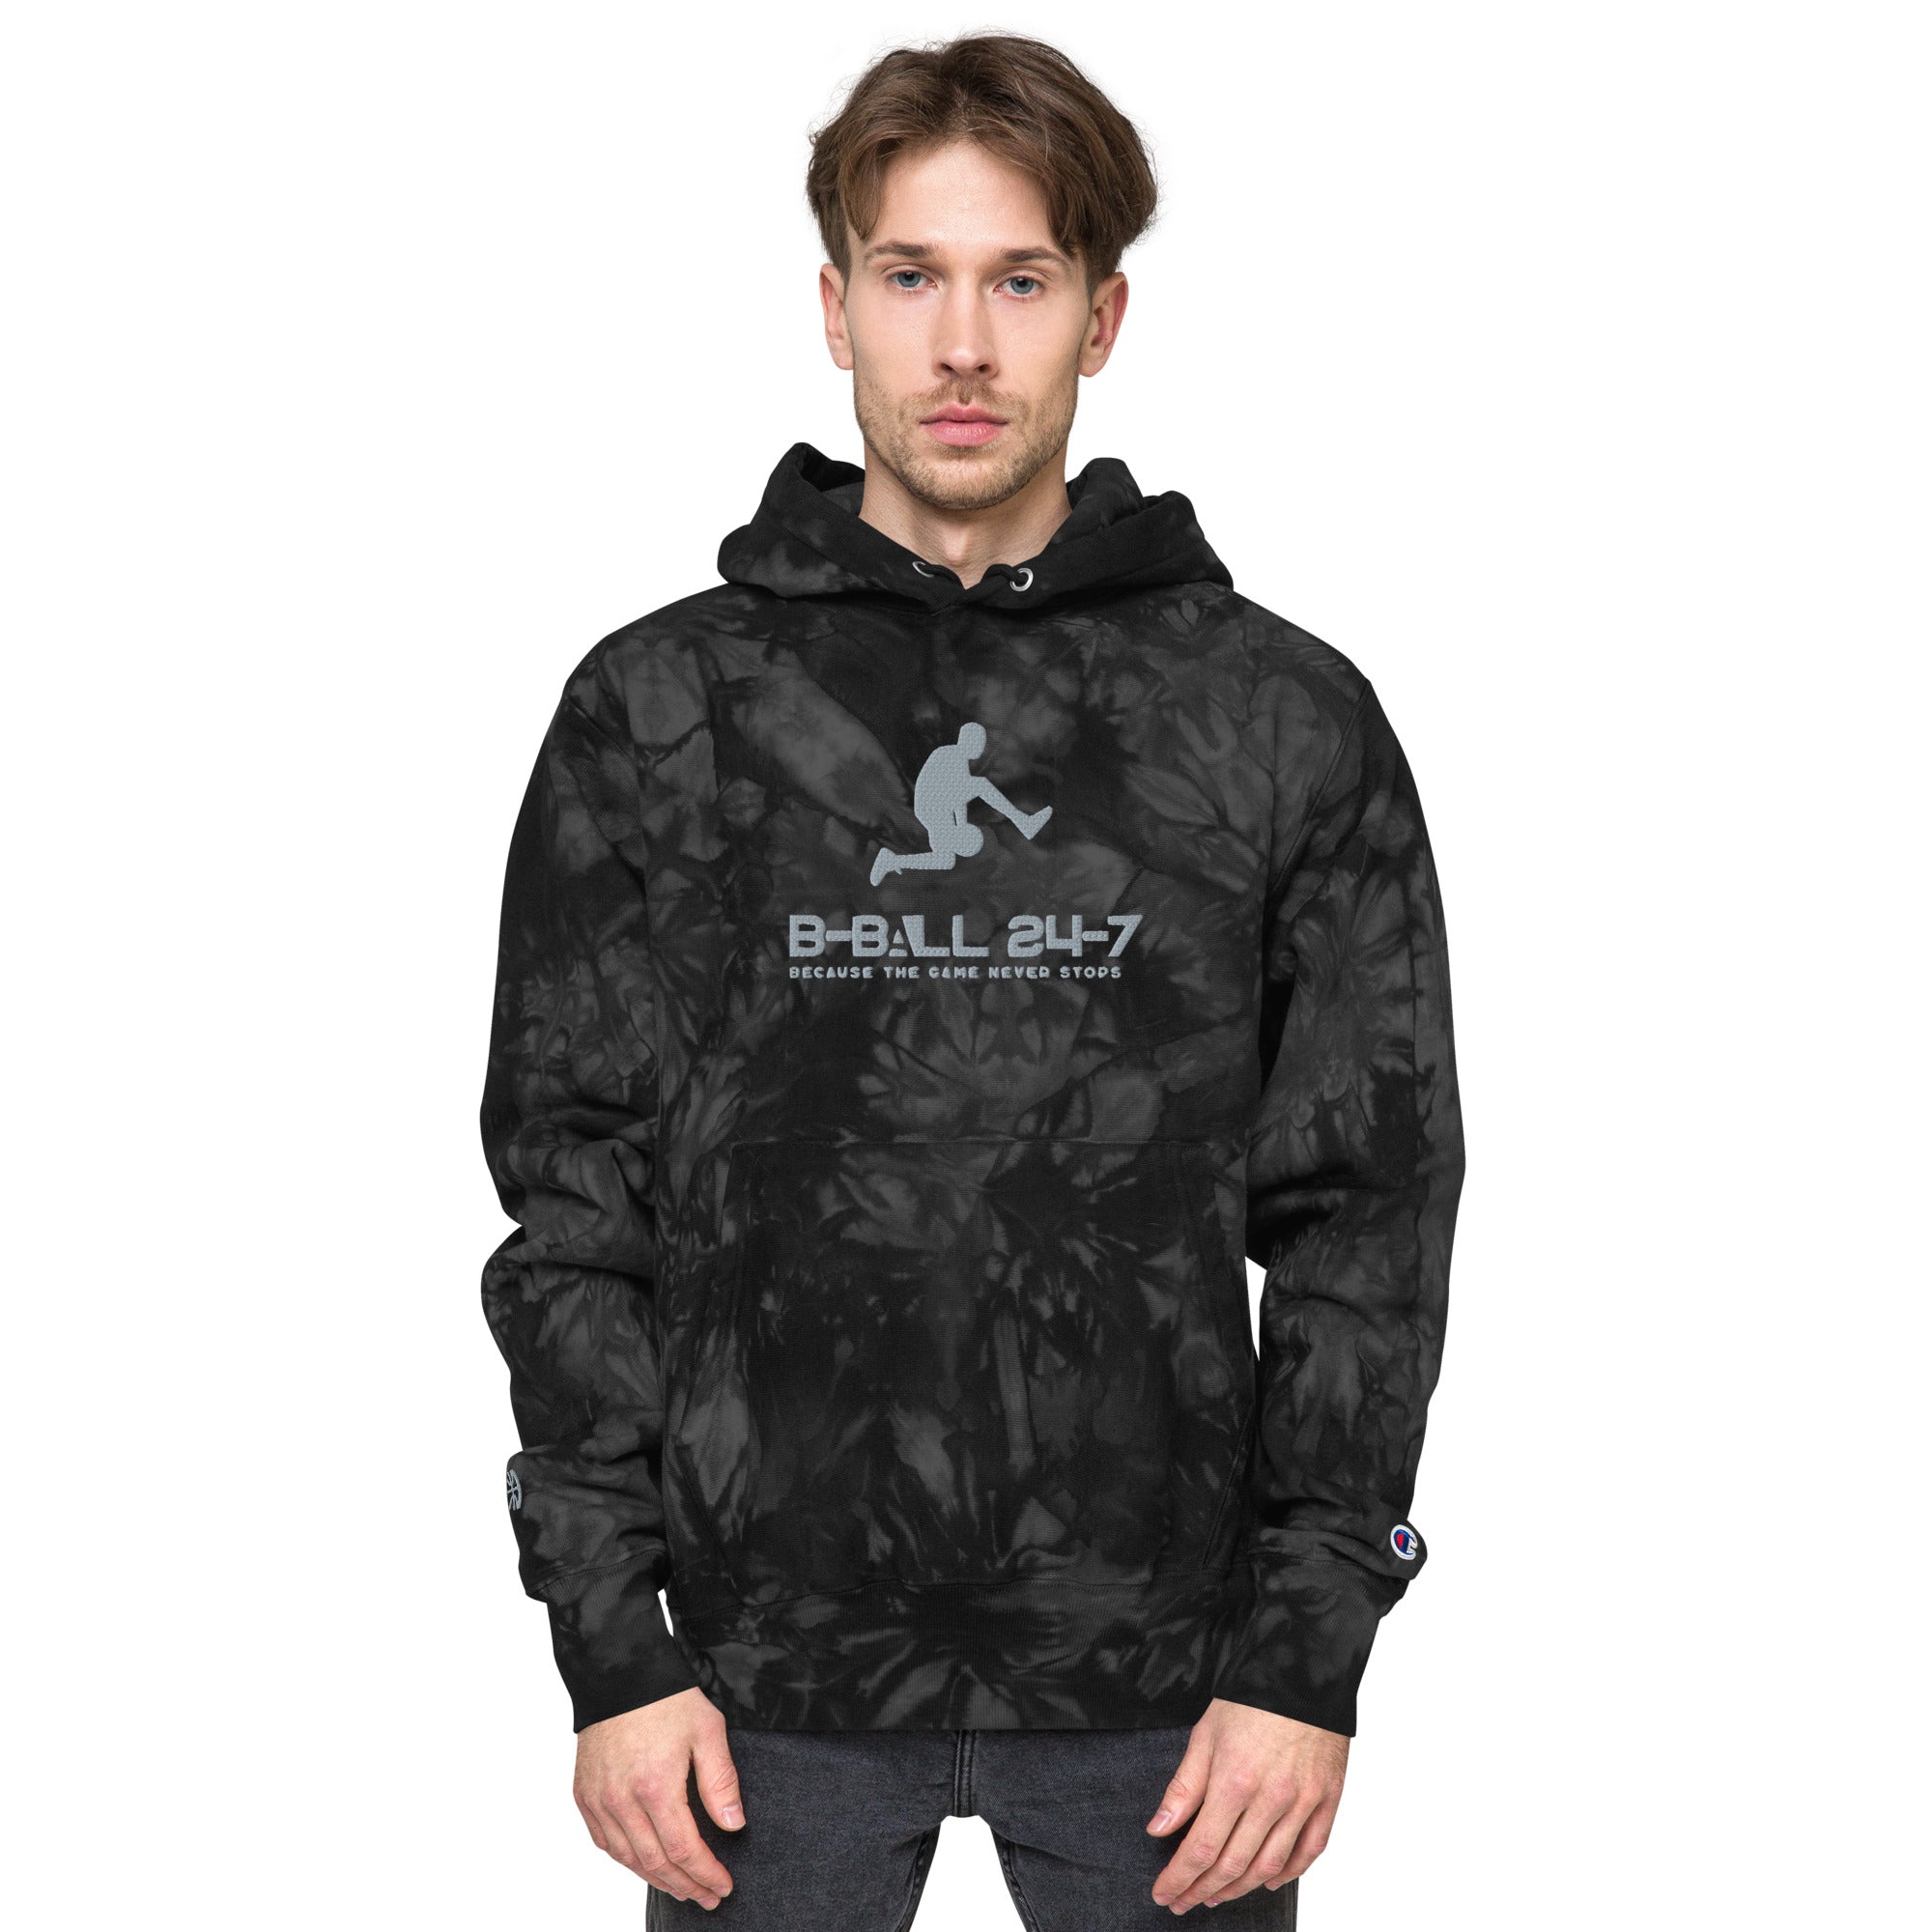 B-Ball 24-7 Embroidered Legacy Unisex Tie-Dye Hoodie